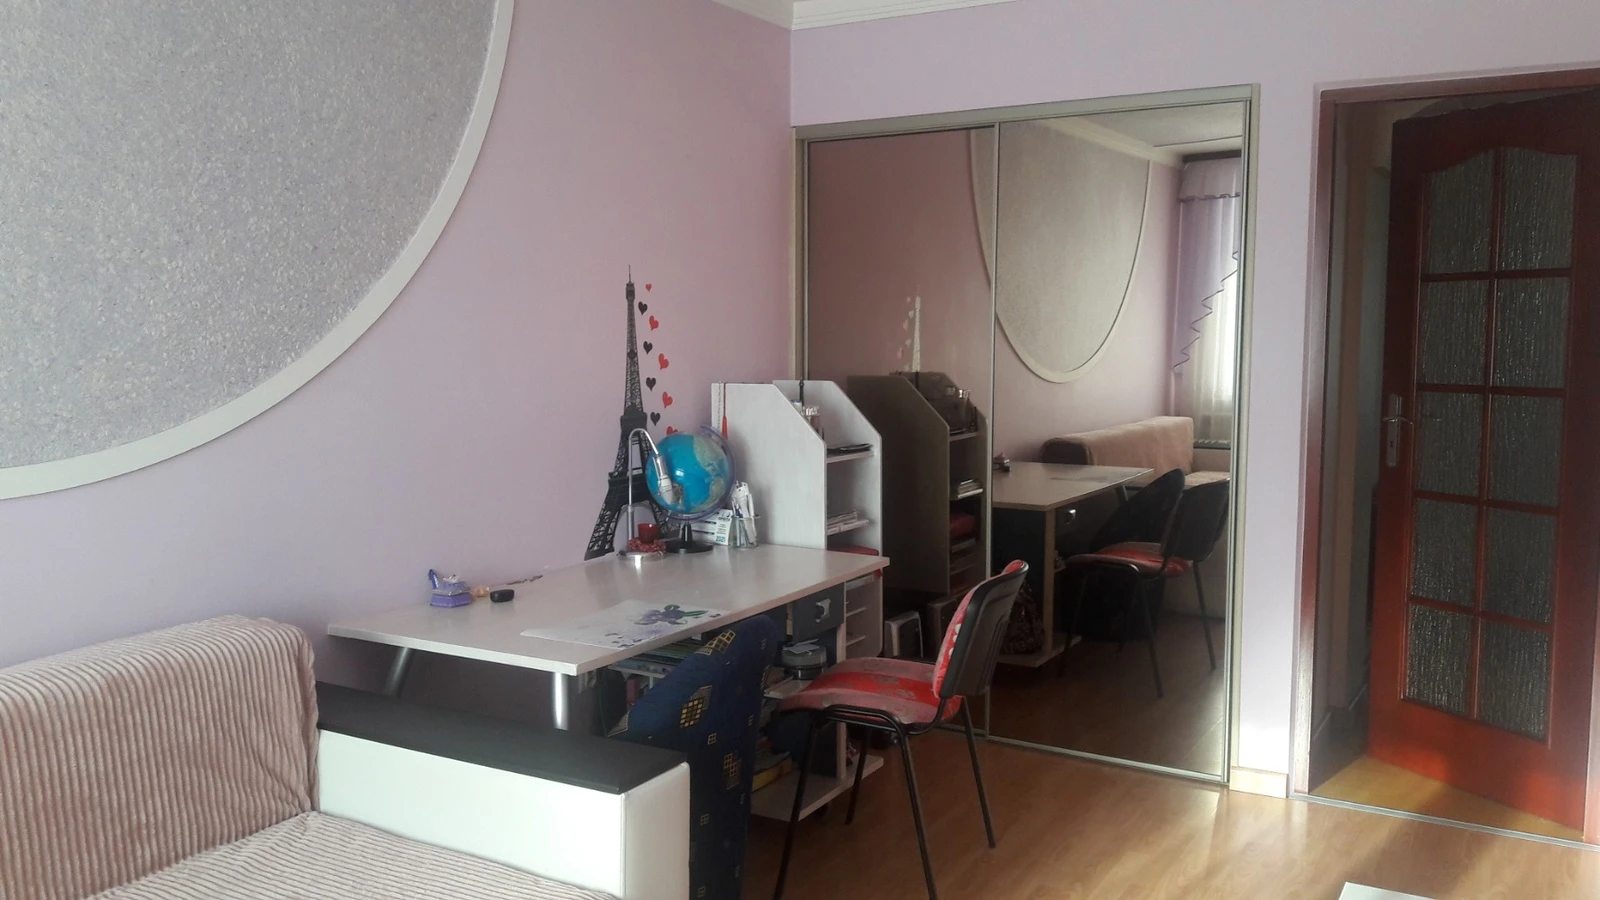 Apartments for sale. 3 rooms, 92 m², 5th floor/5 floors. Bam, Ternopil. 